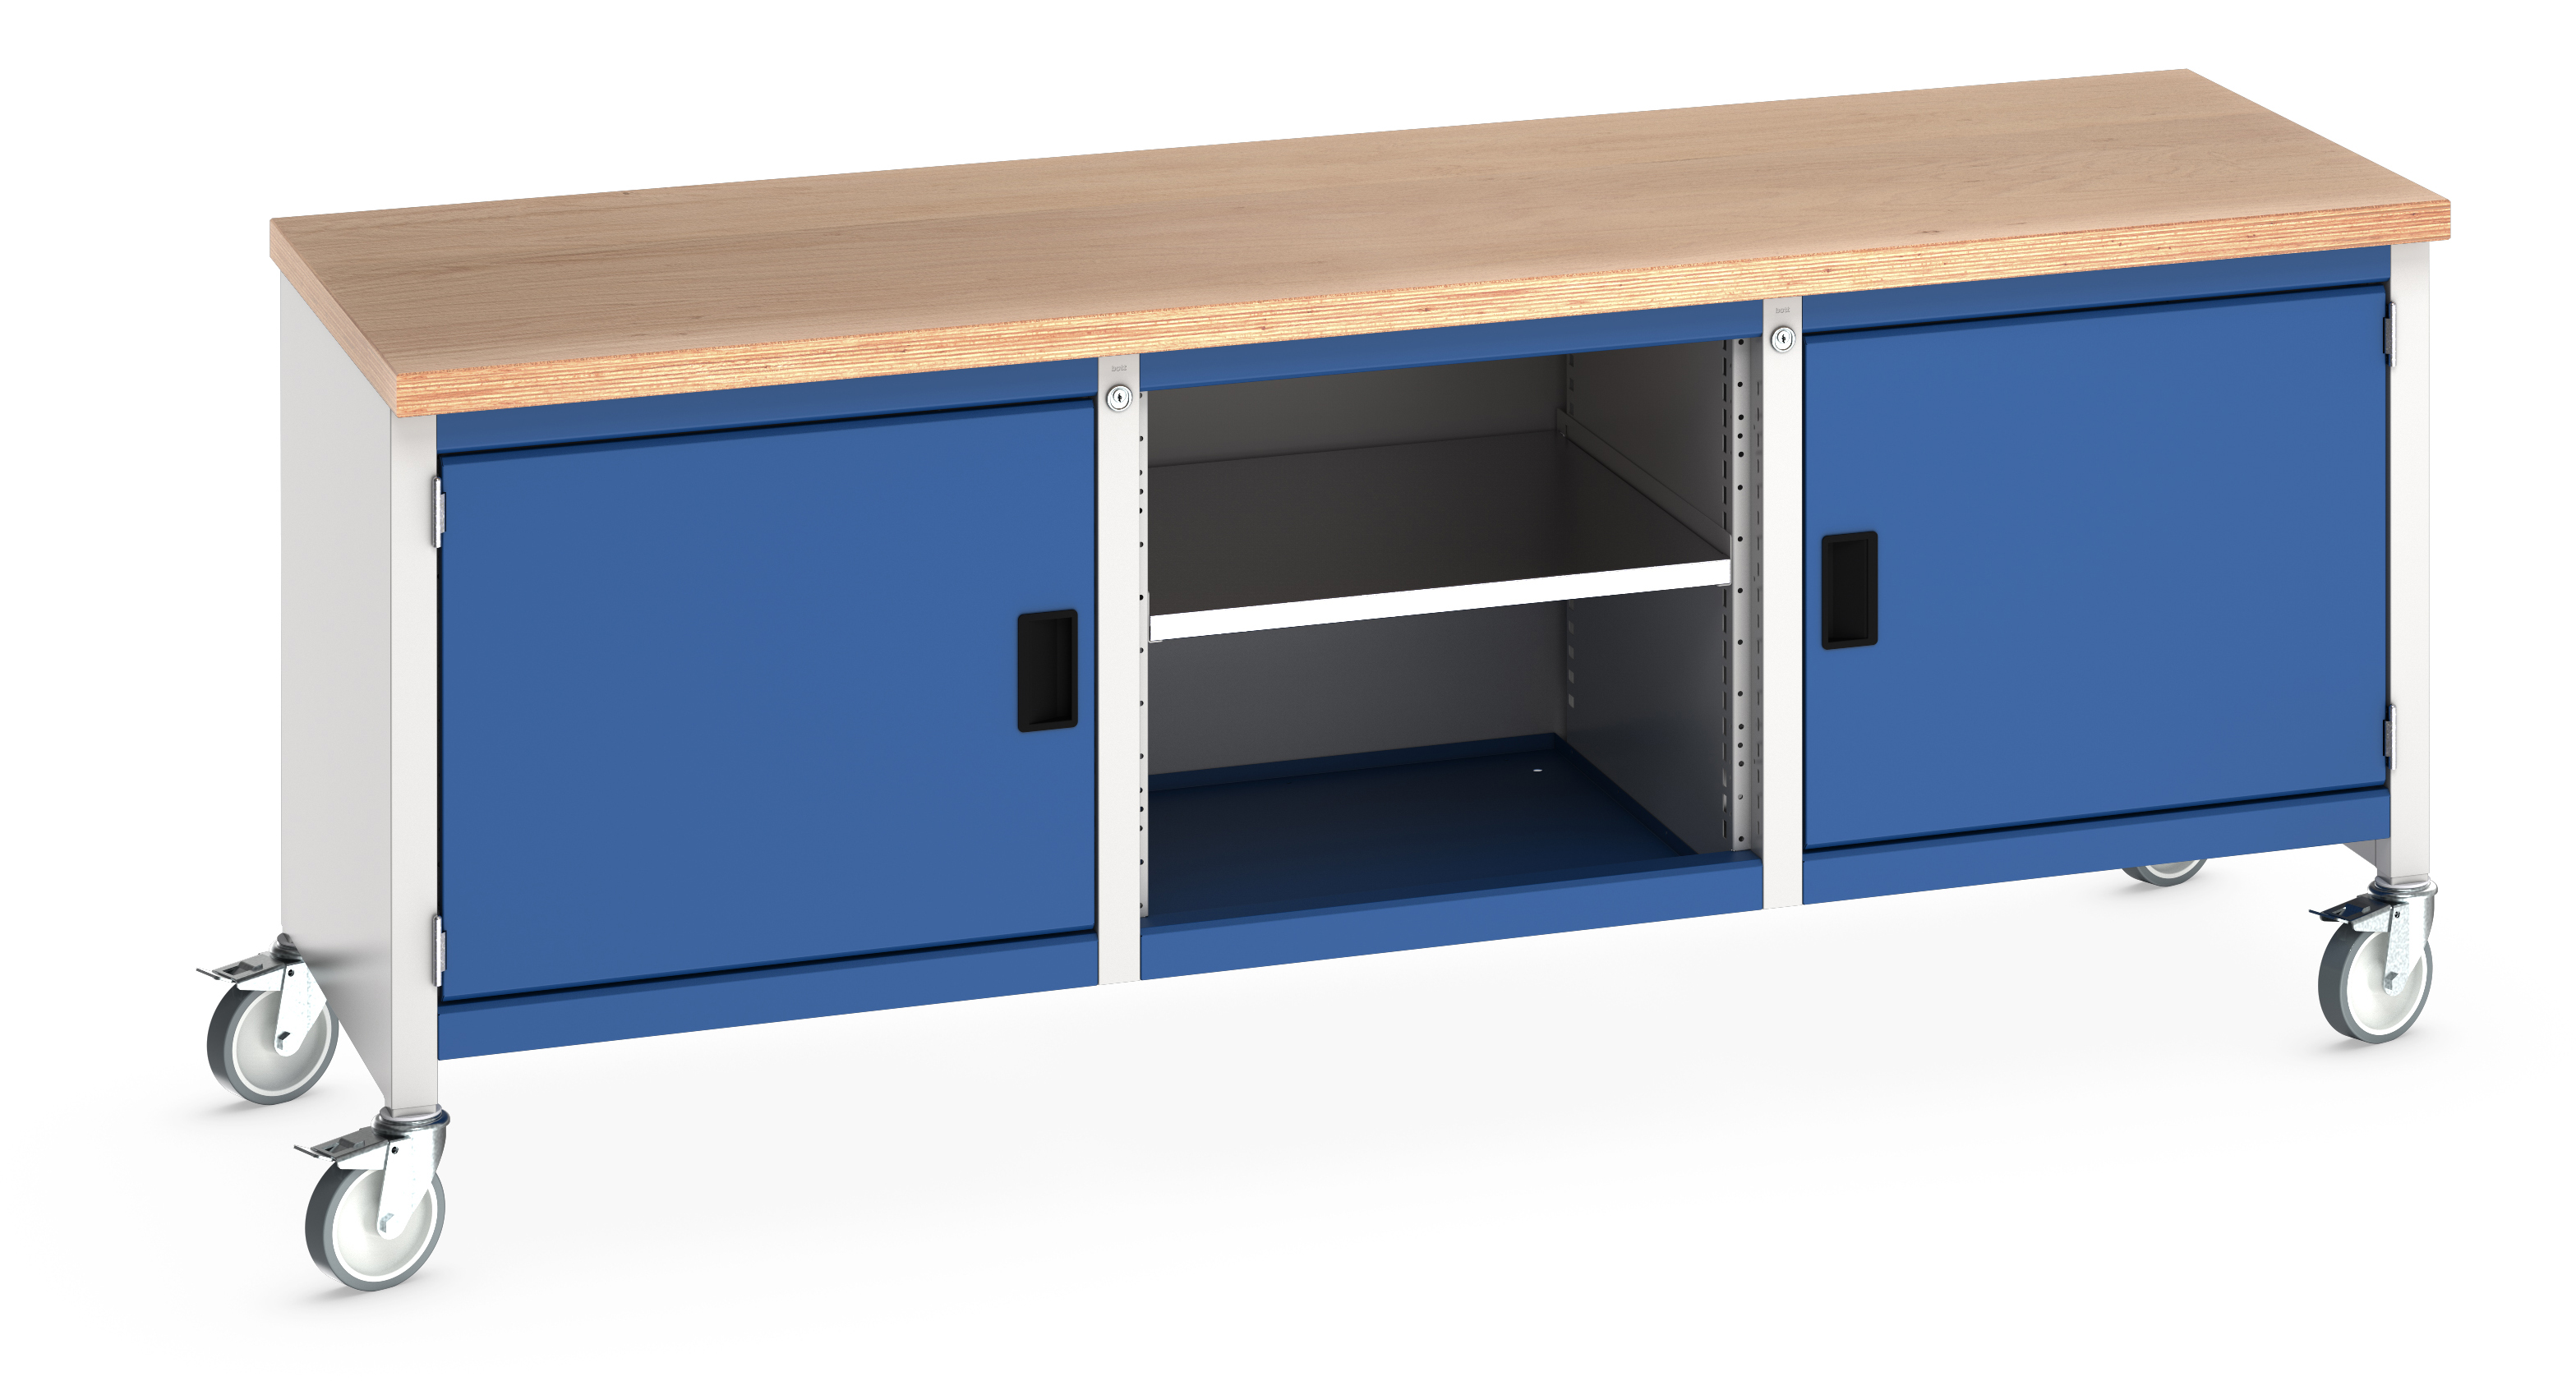 Bott Cubio Mobile Storage Bench With Full Cupboard / Open Cupboard /Full Cupboard - 41002118.11V